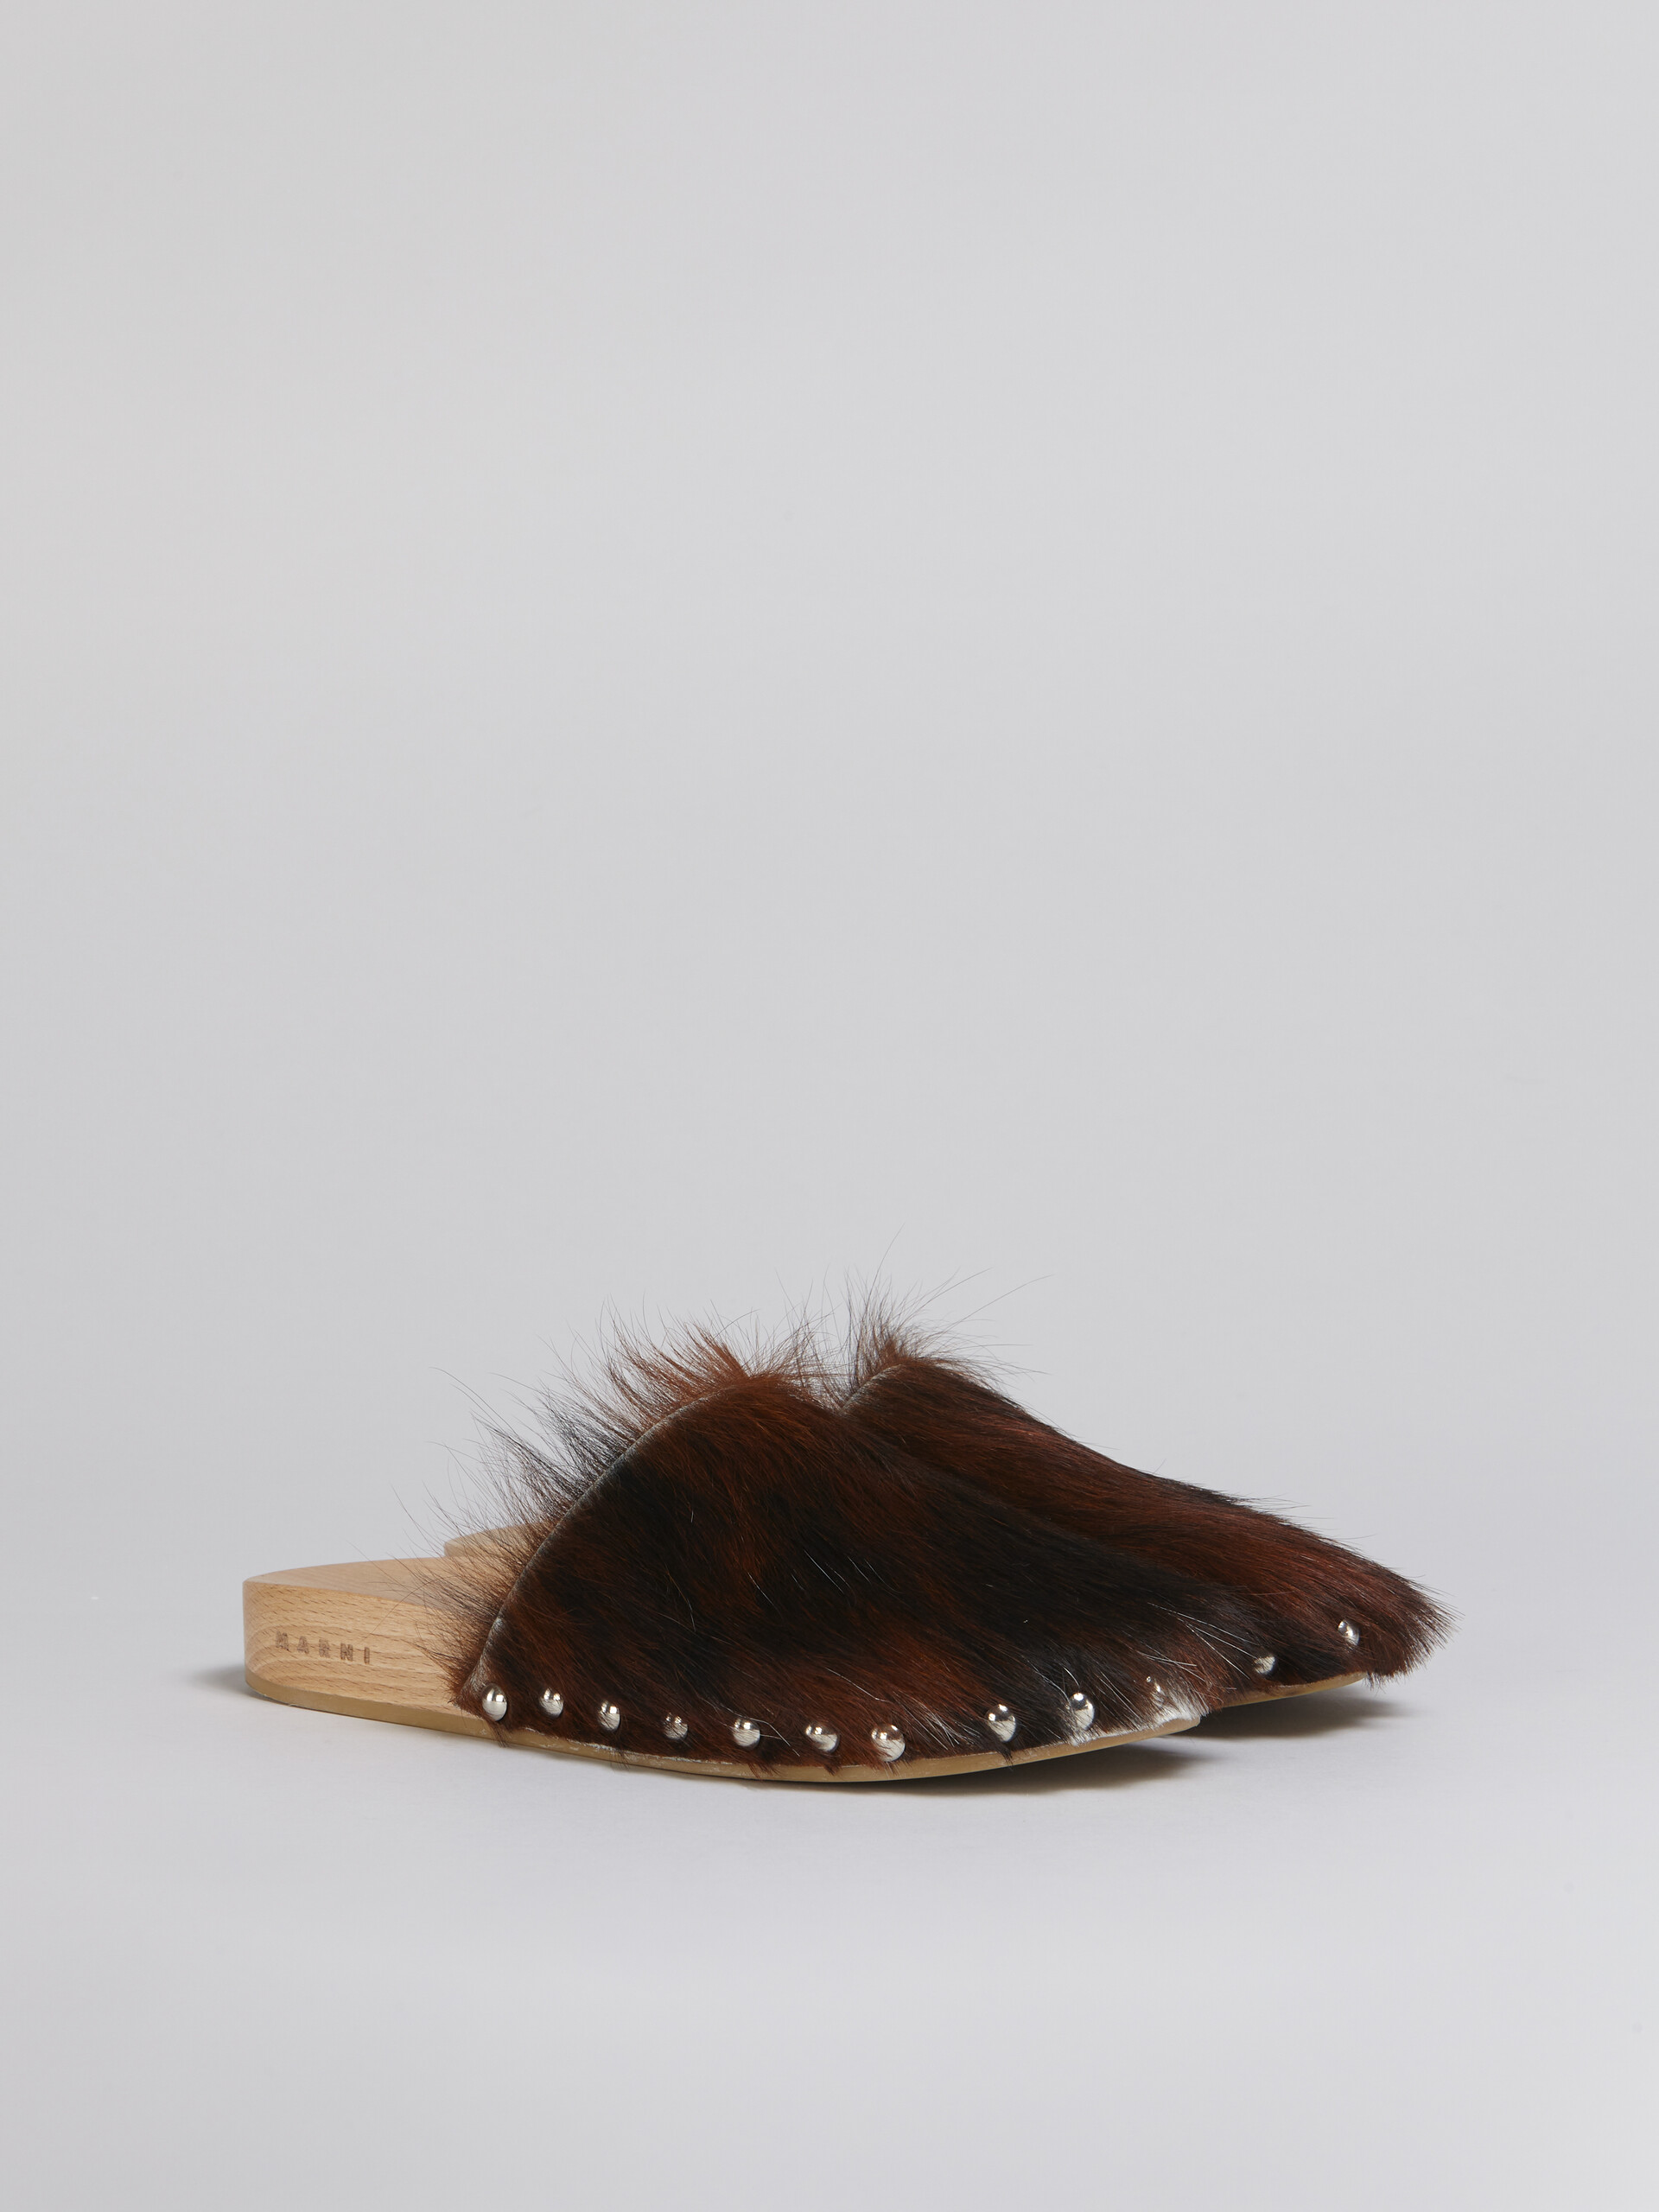 Spotted long calf hair wood sabot - Clogs - Image 2